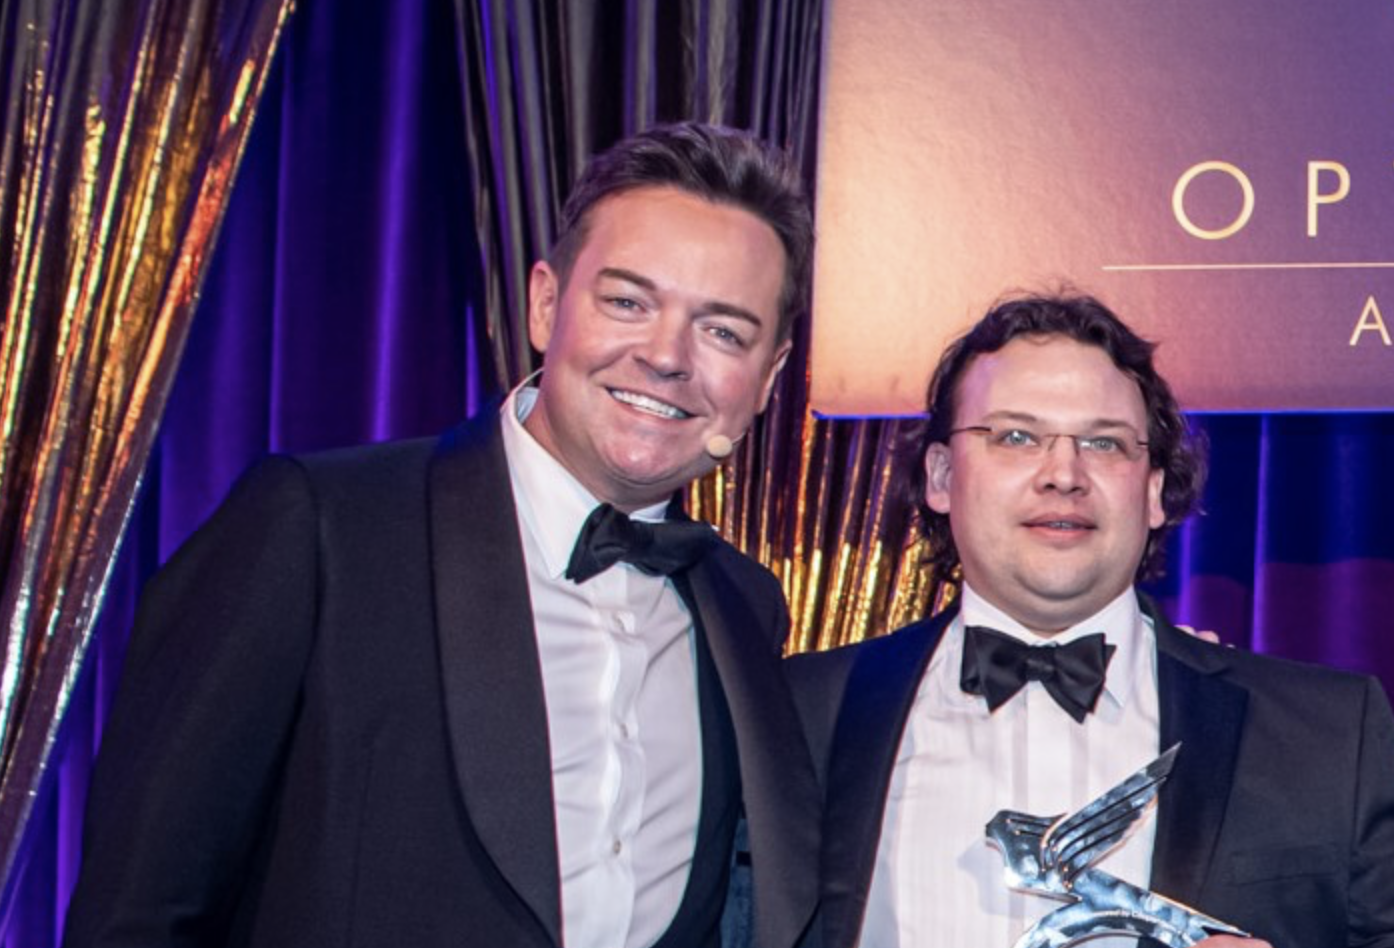 Optometrist recognised as Covid Hero at leading industry awards